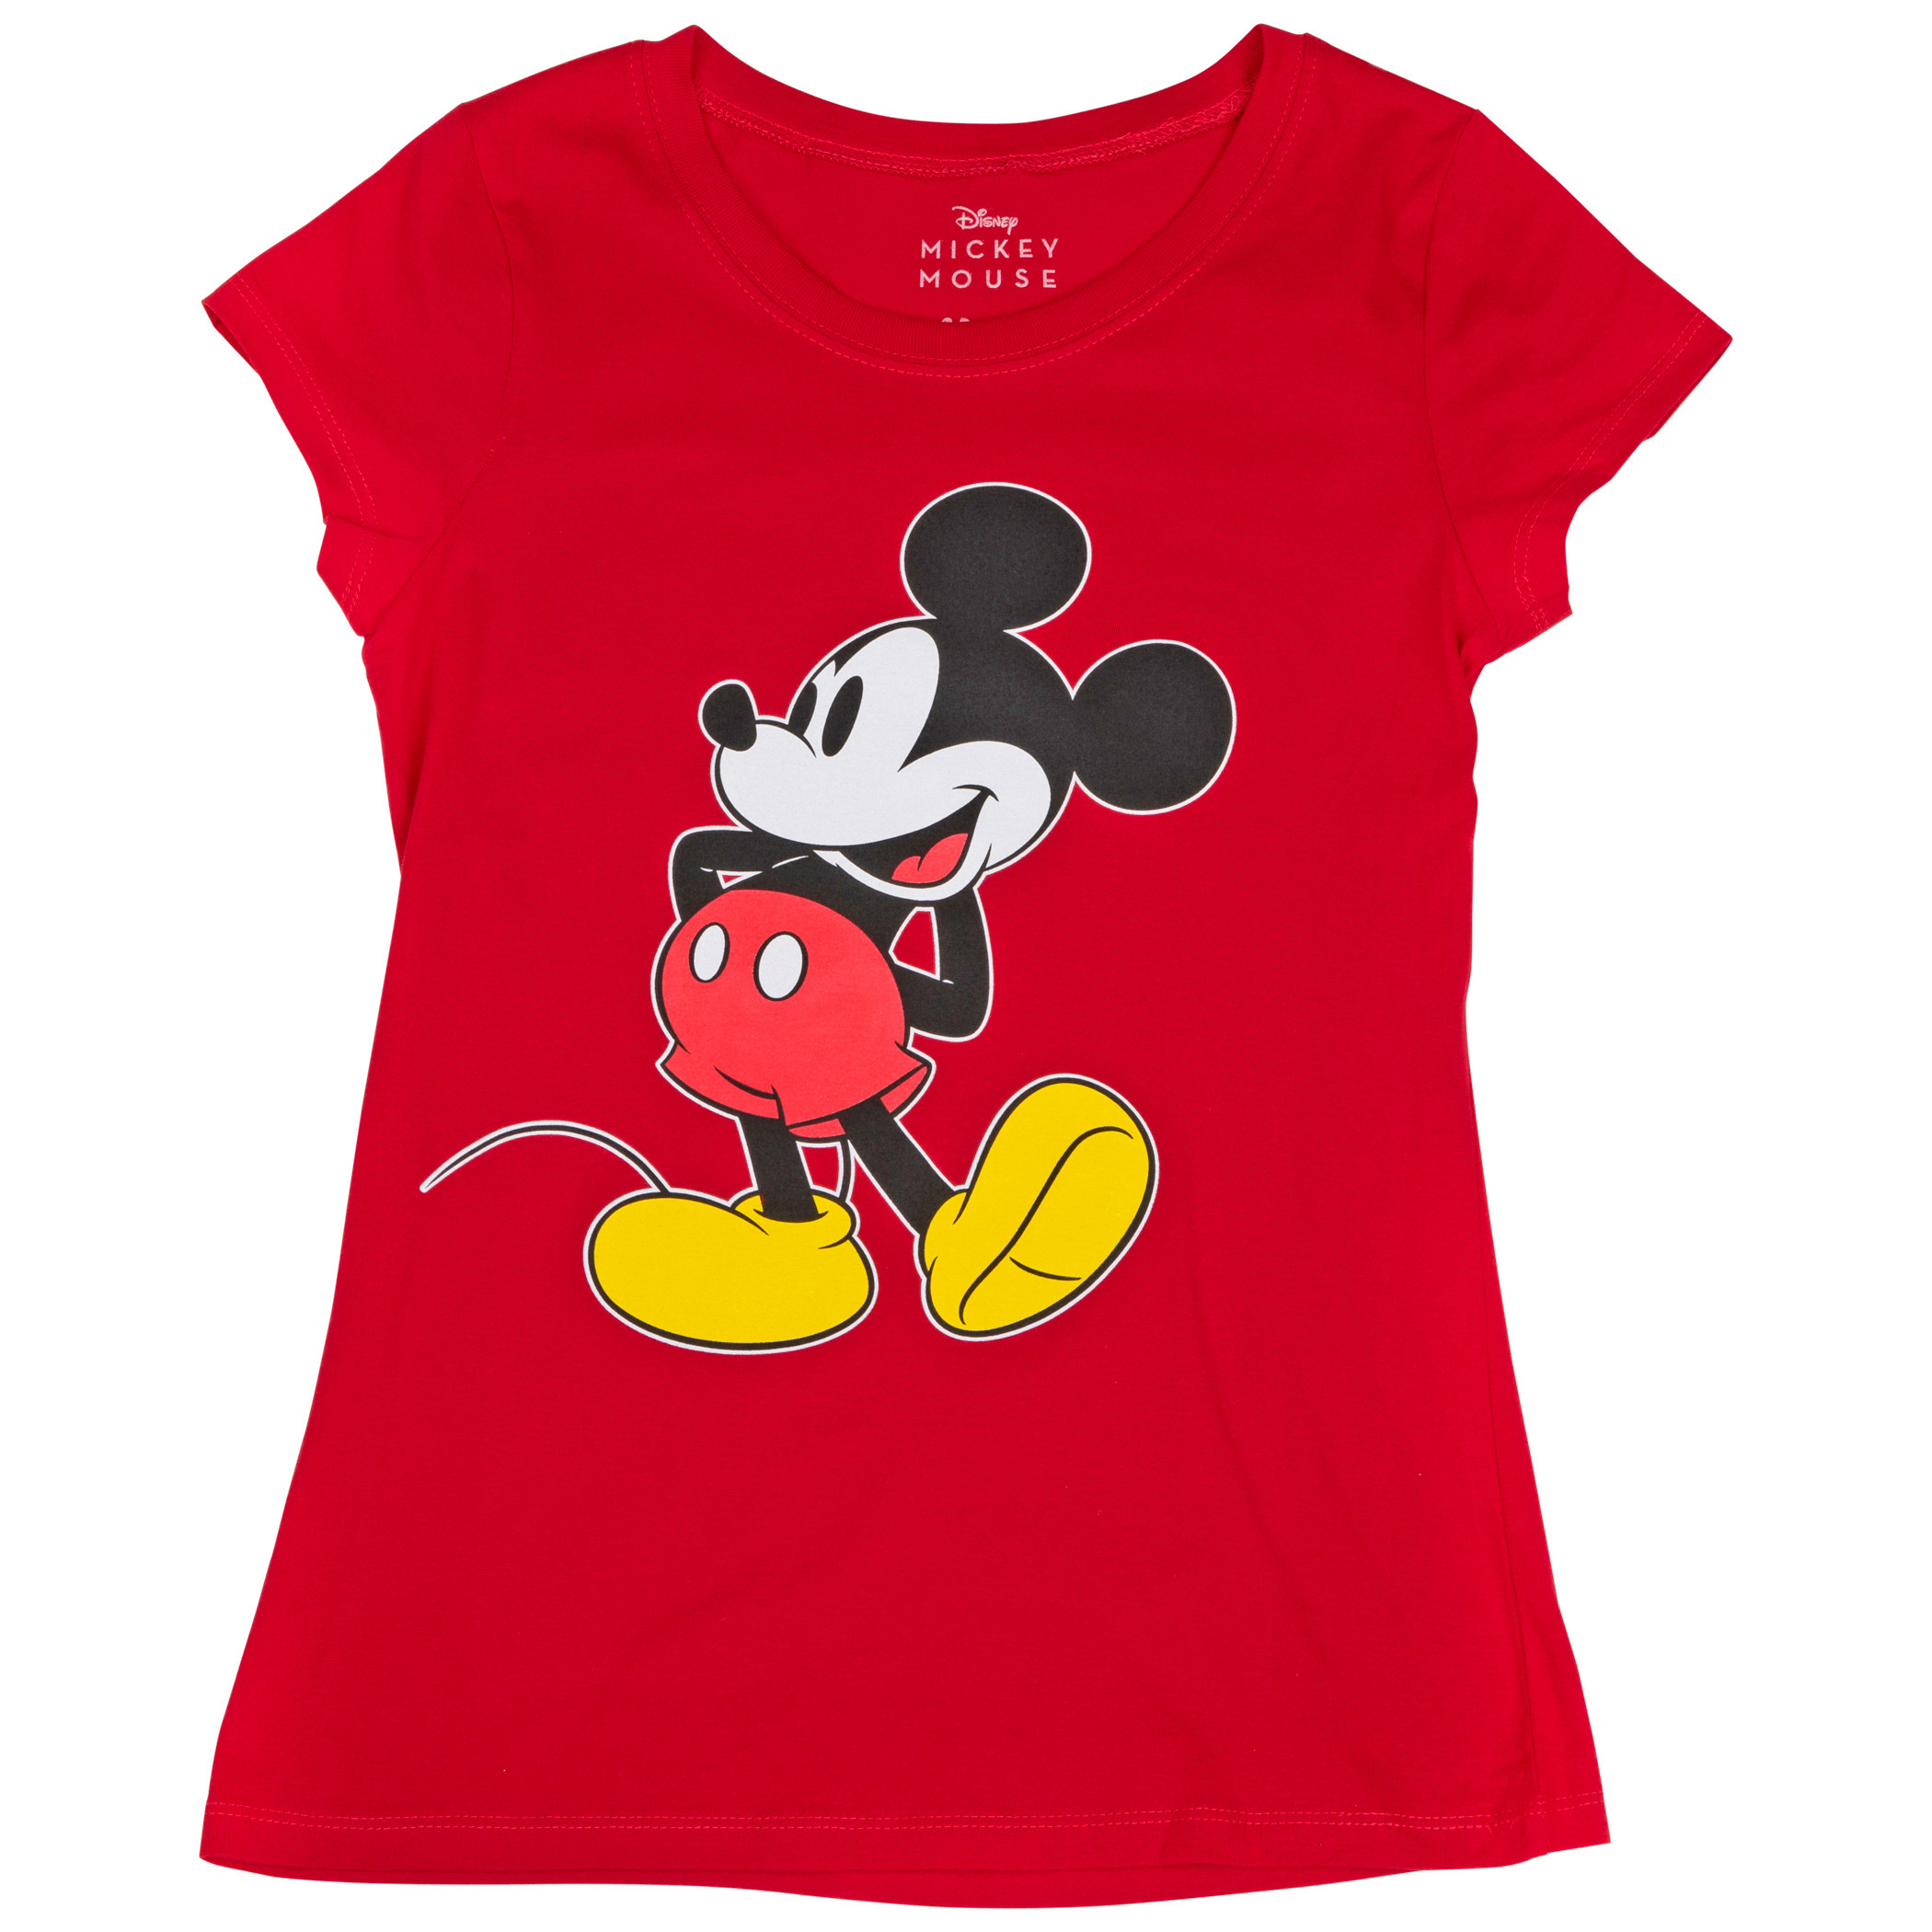 Disney's Mickey Mouse Standing Women's T-Shirt